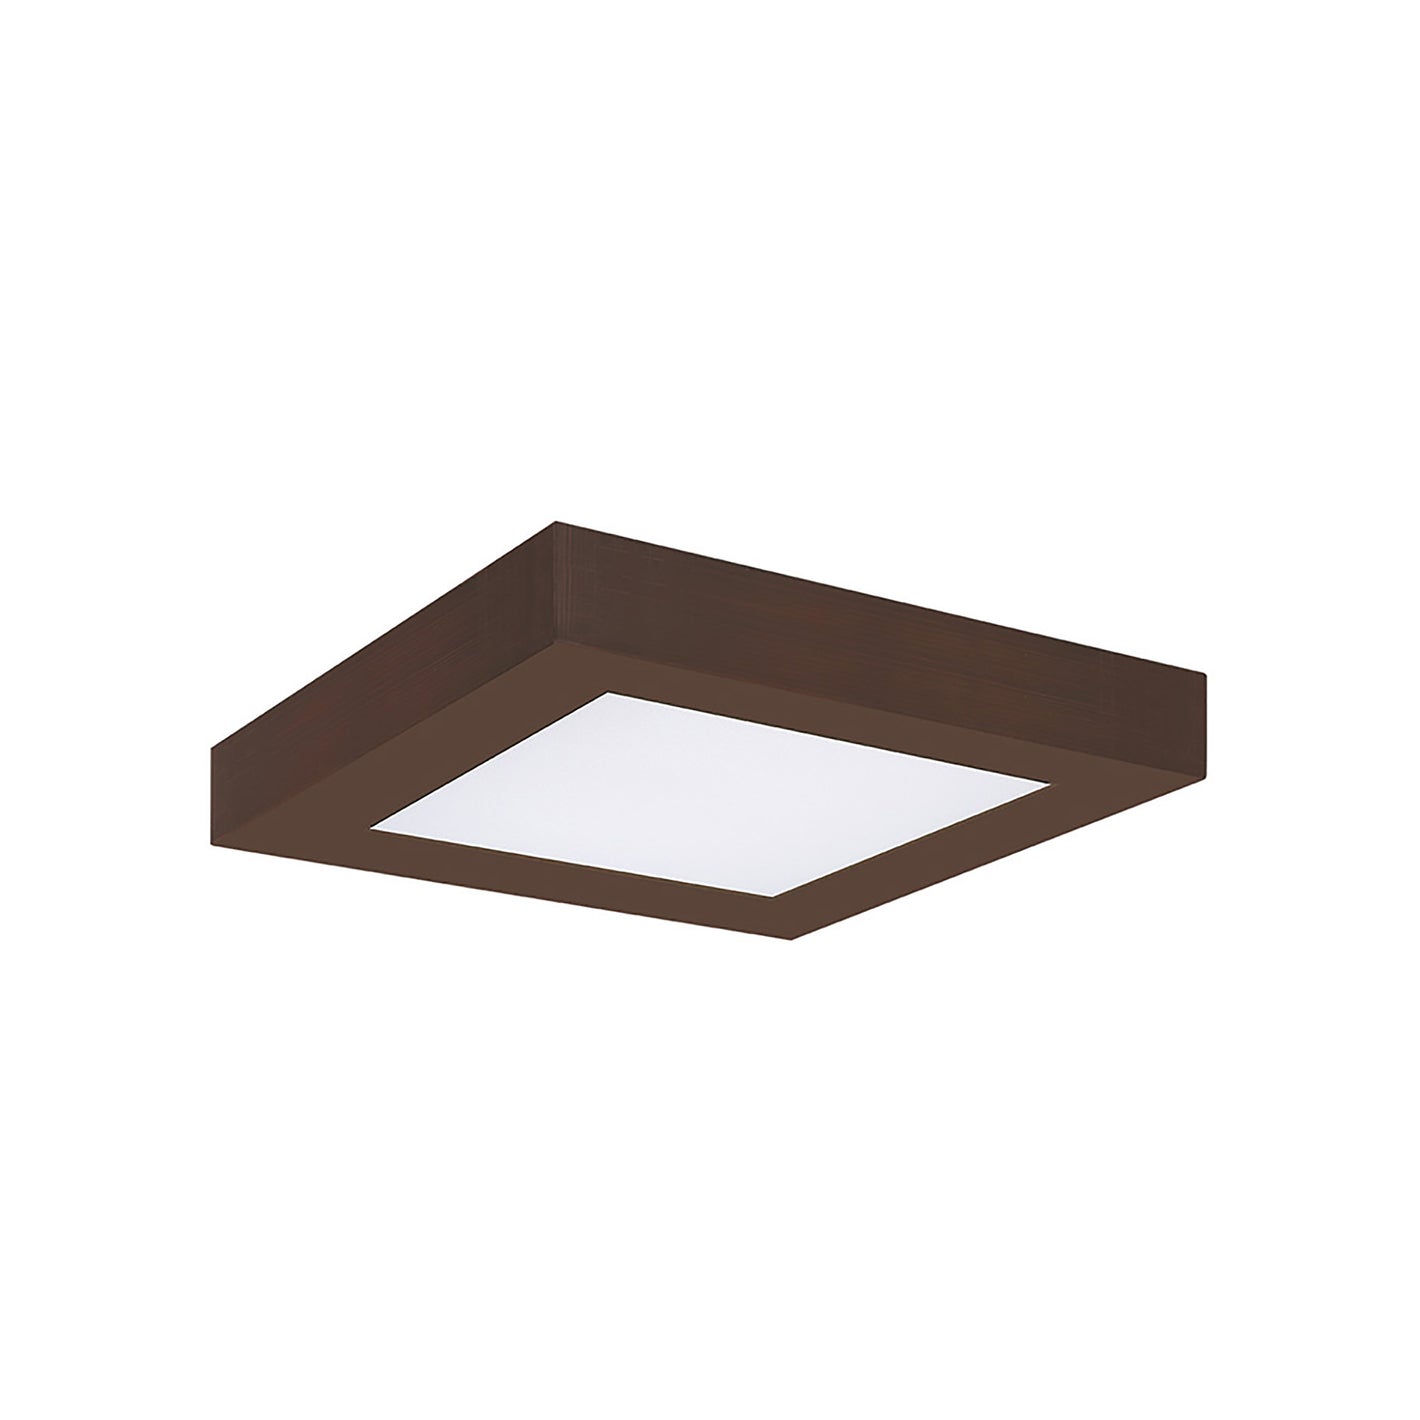 5.5 Inch Square 5CCT Color Selectable Surface Mount Panel Light Fixture, Bronze Finish